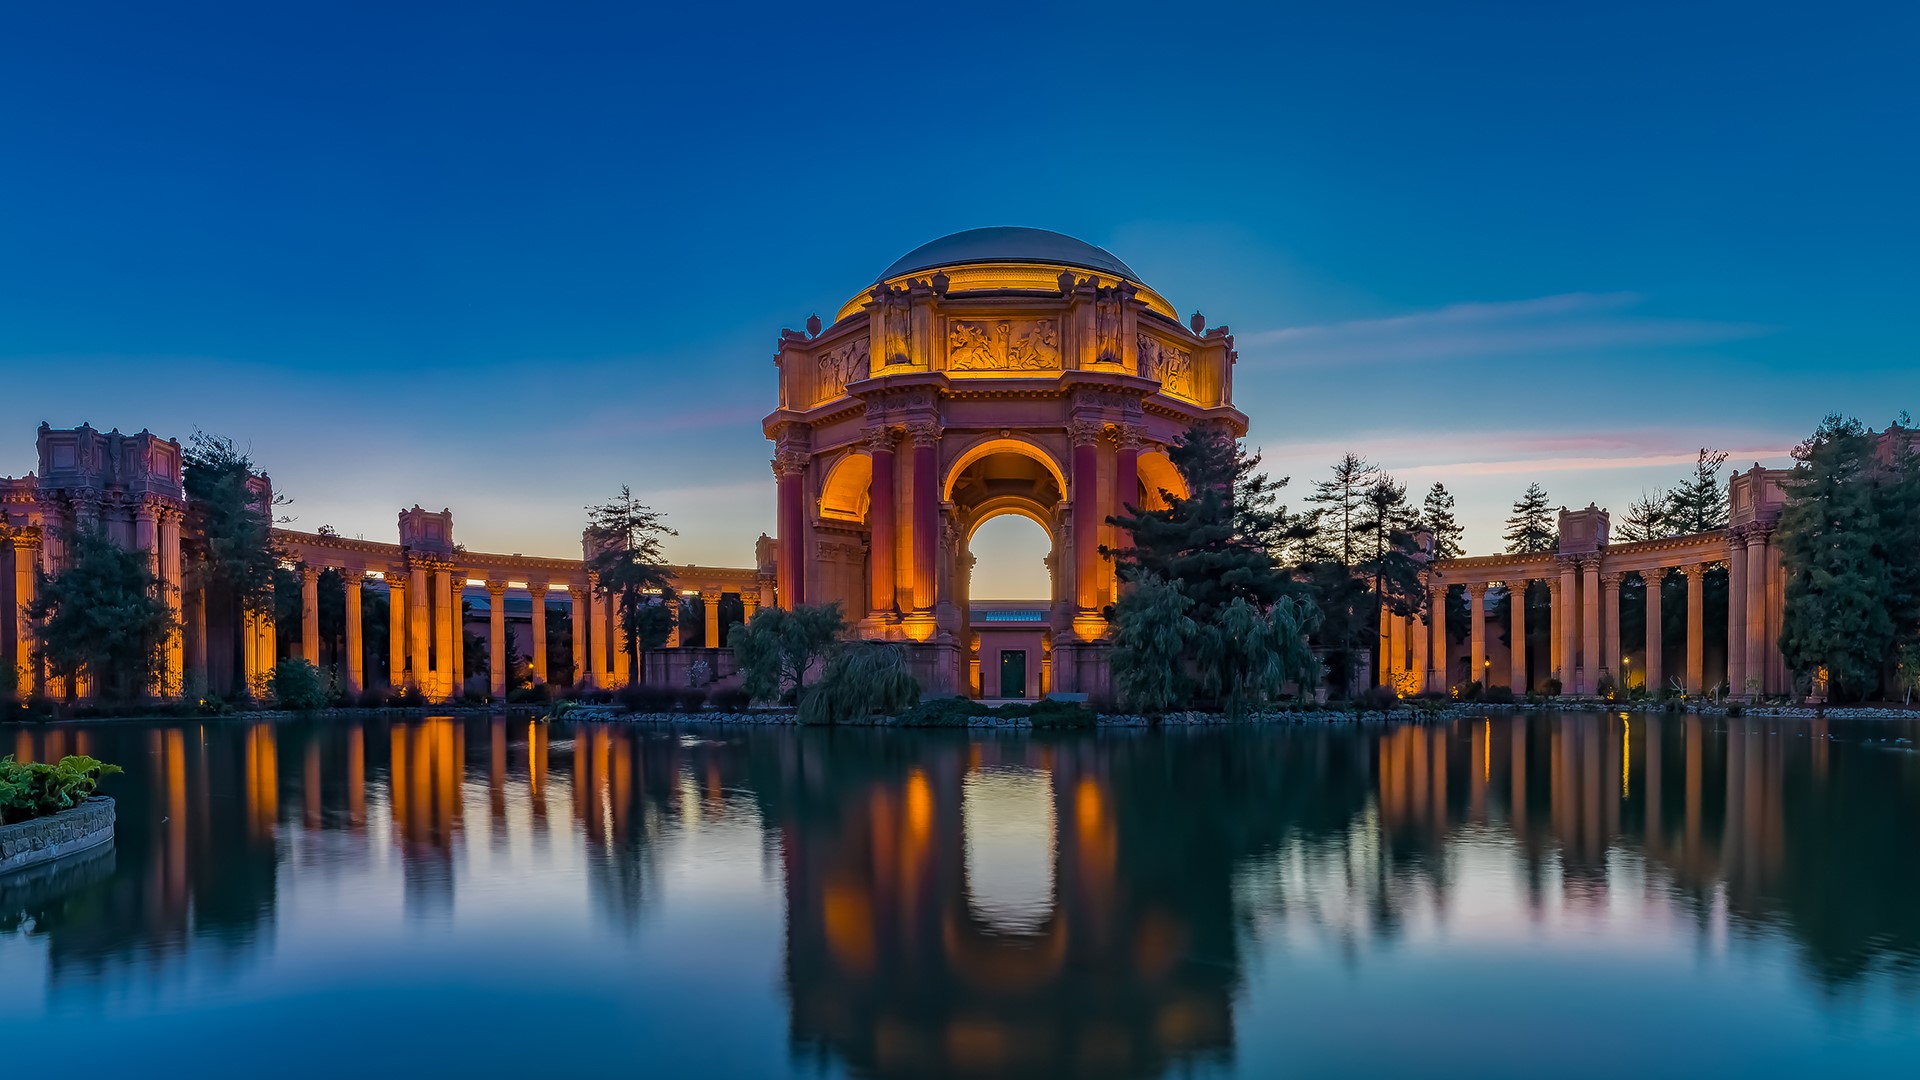 General 1920x1080 nature landscape lights water architecture clear sky sunset trees palace San Francisco California USA Palace of Fine Arts